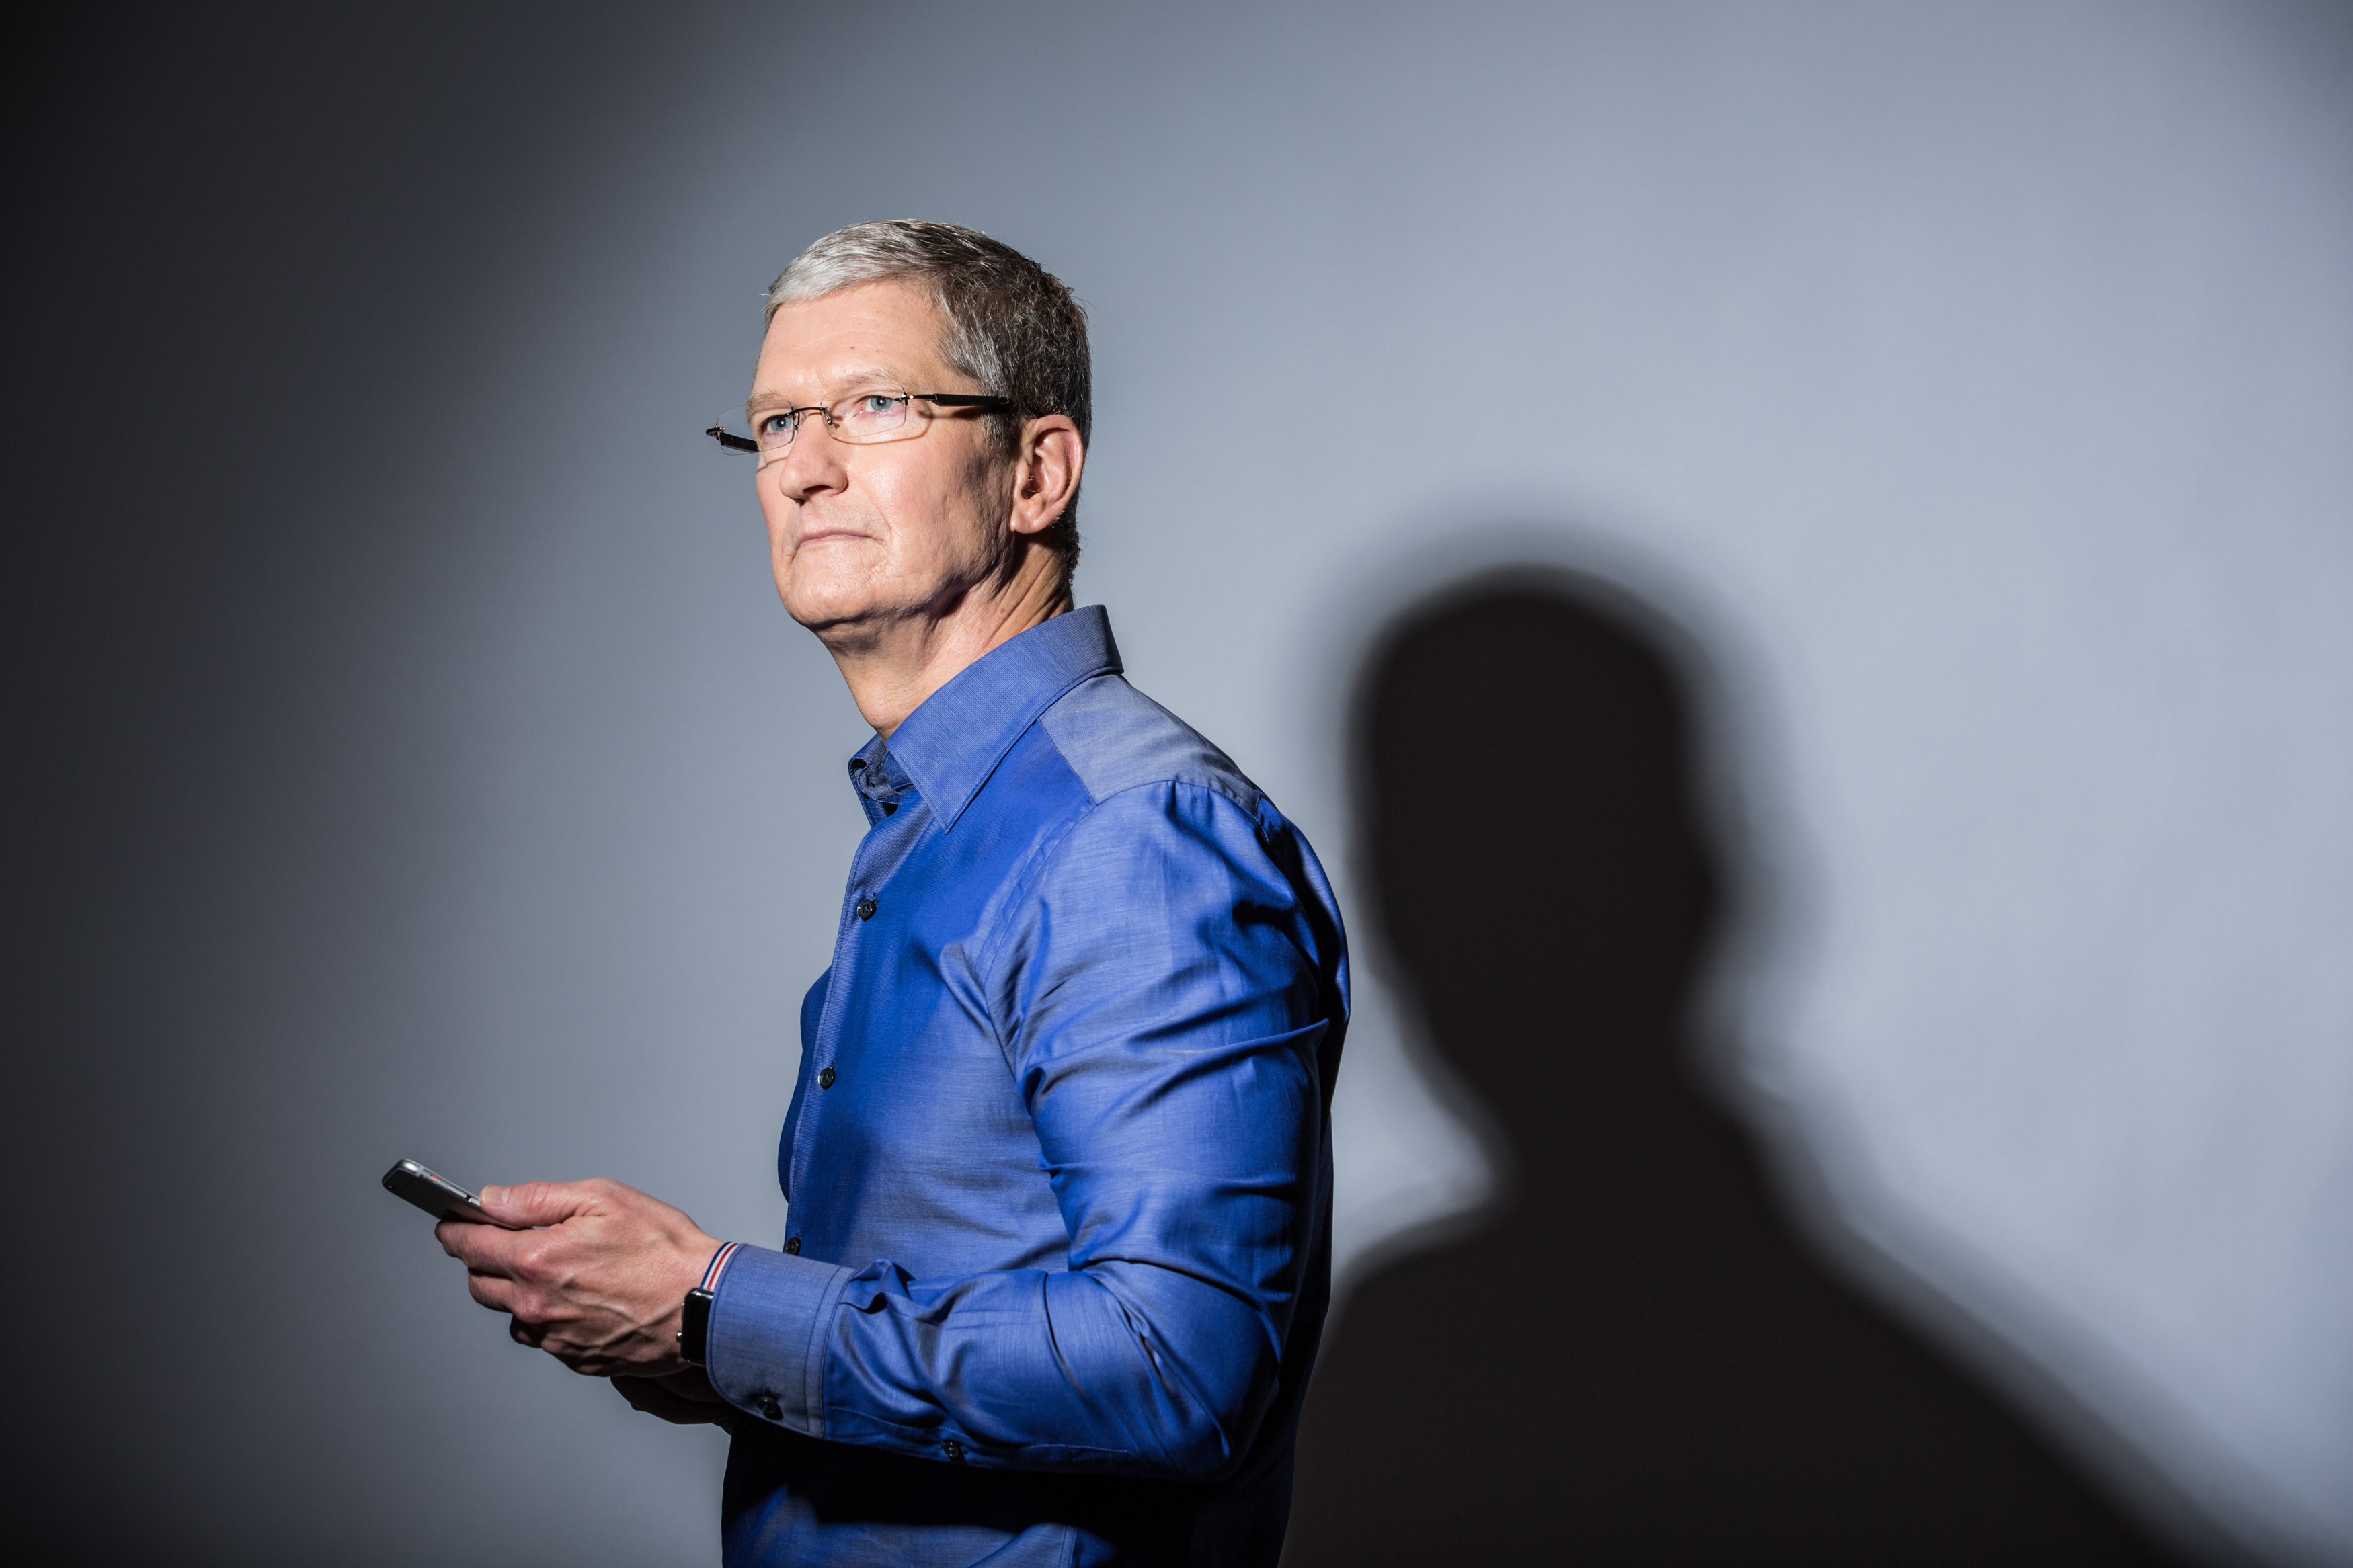 Apple CEO Tim Cook poses for a portrait at Apple's global headquarters in Cupertino, California on July 28, 2016. (The Washington Post—The Washington Post/Getty Images)